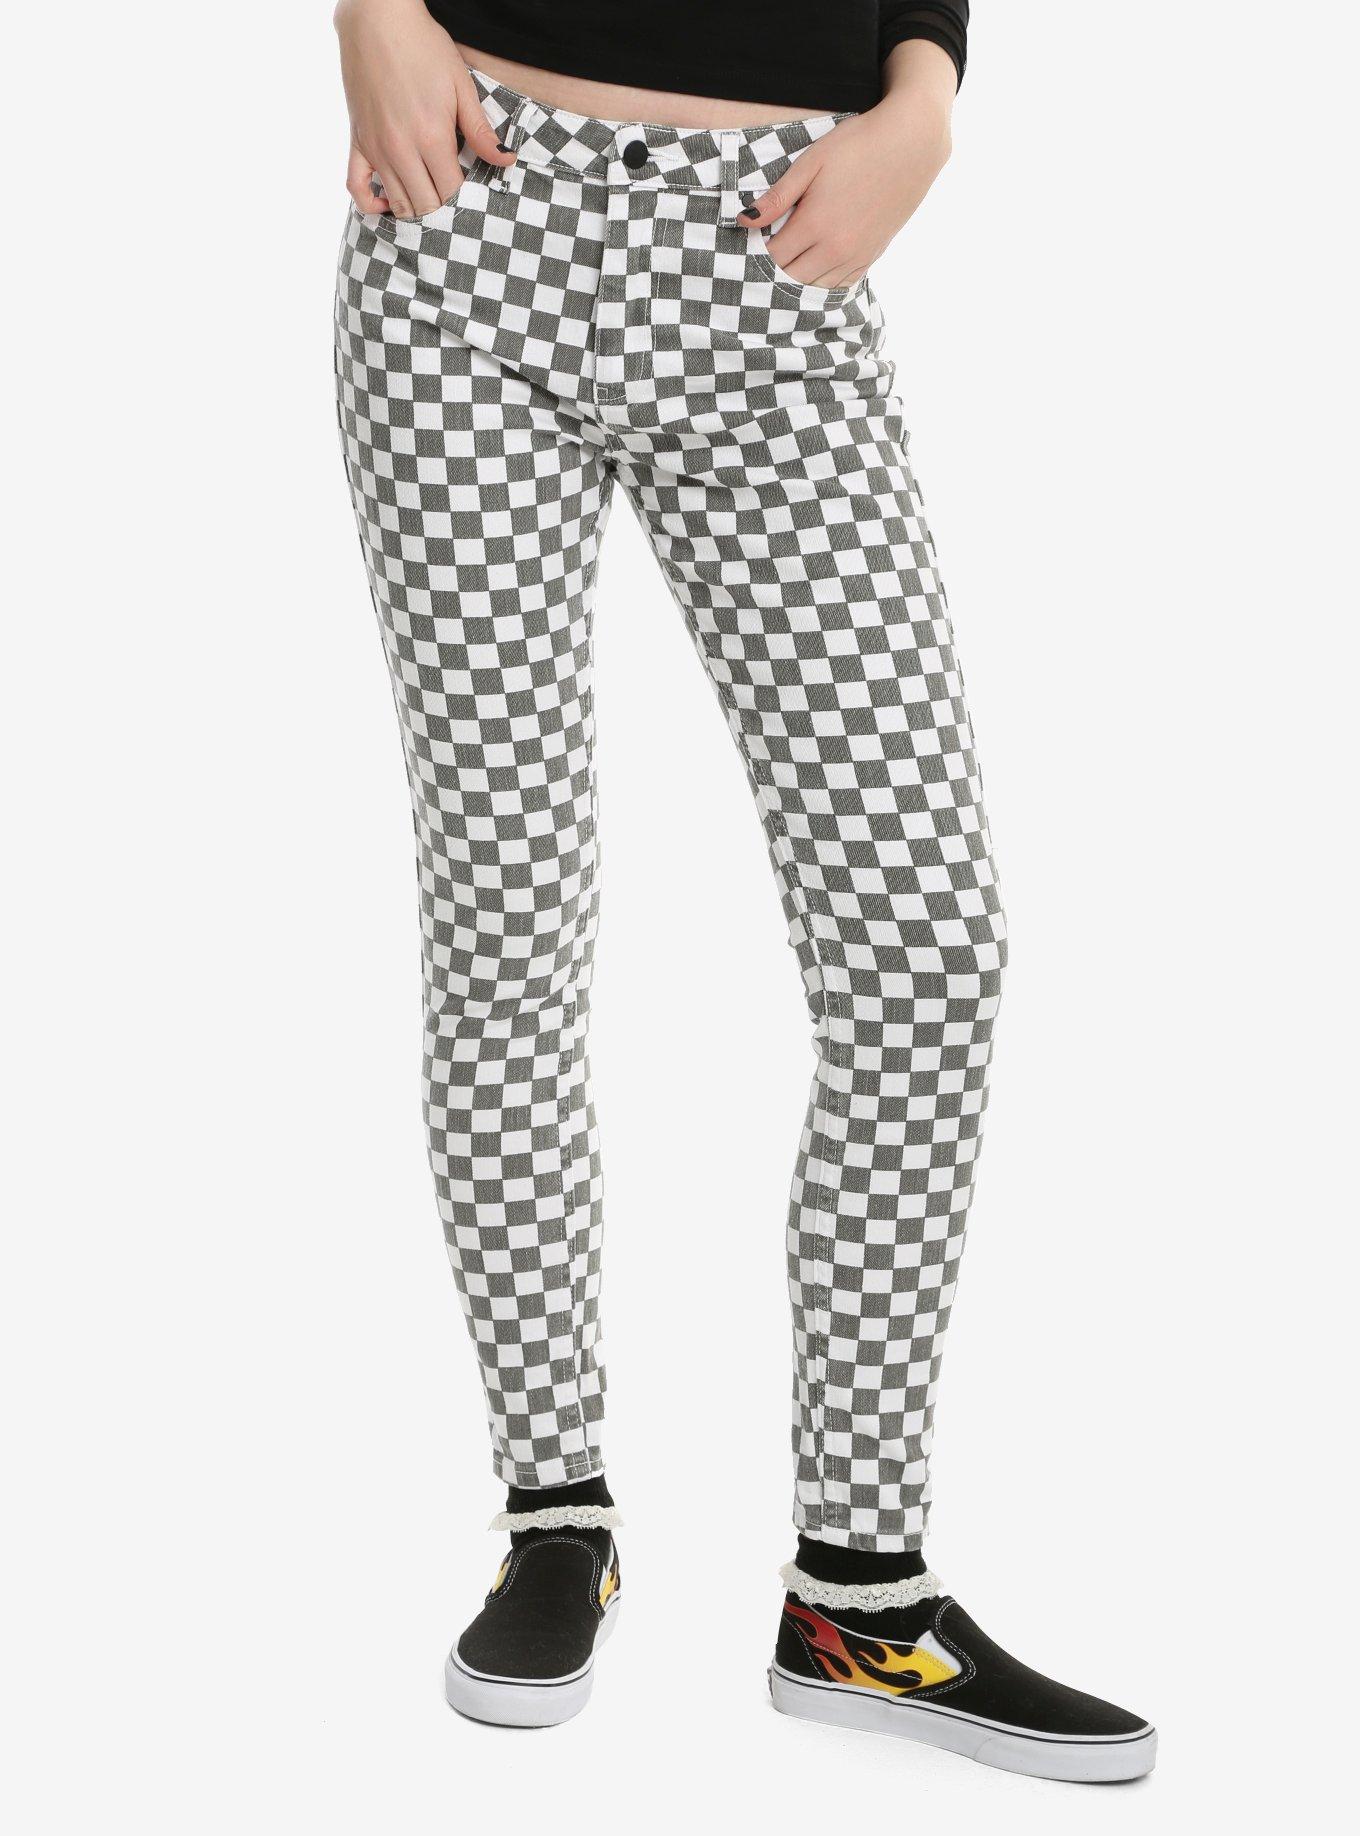 Dickies Grey & White Checkered Skinny Jeans | Hot Topic